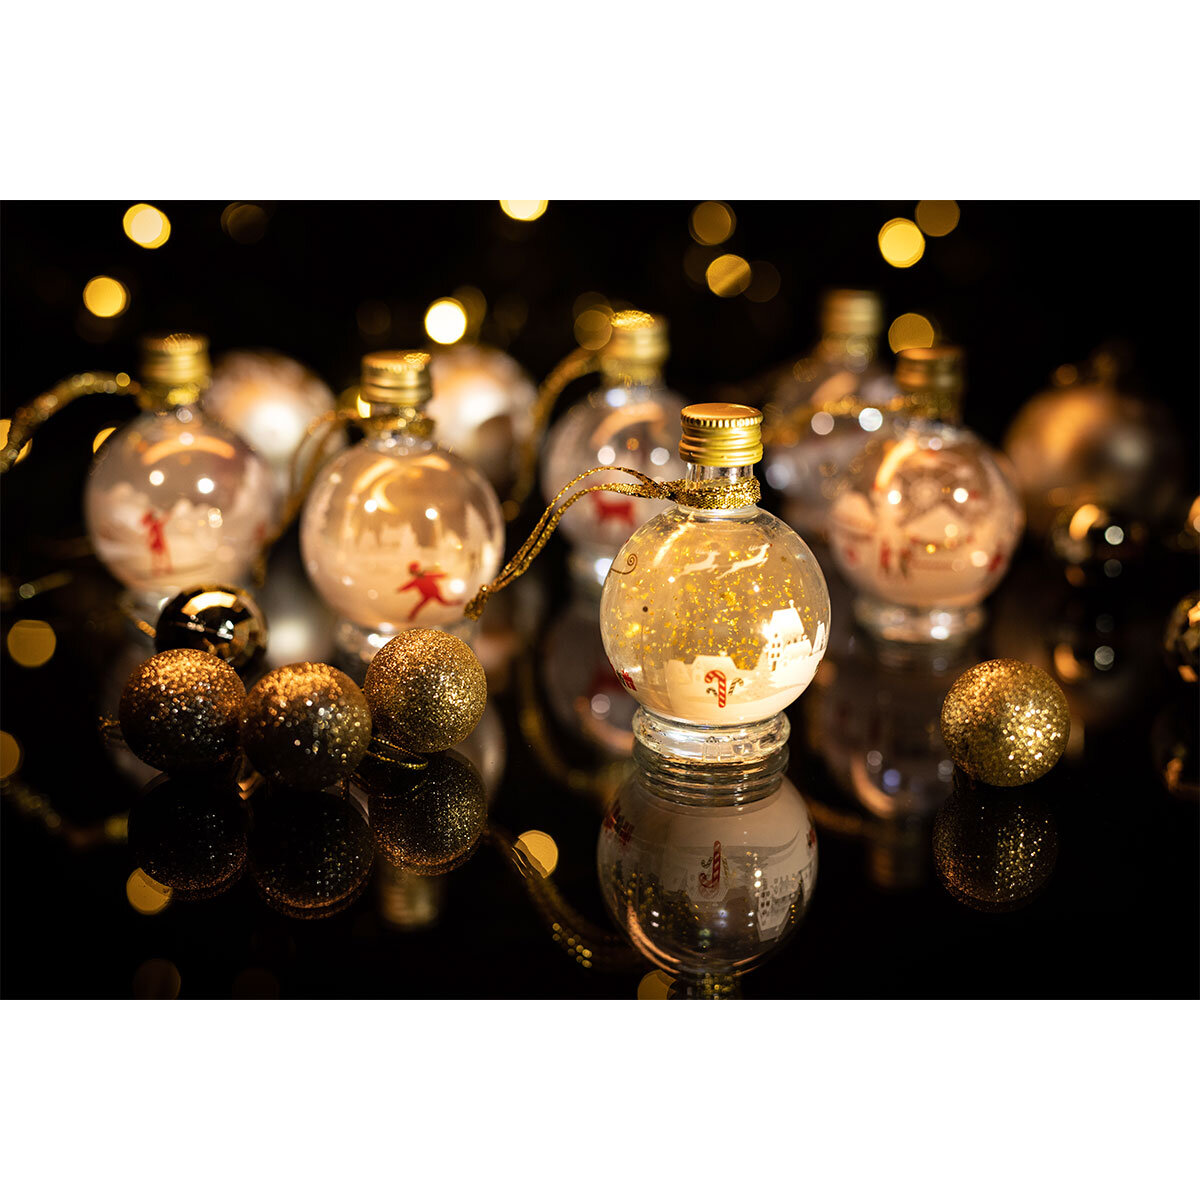 Close up of bauble